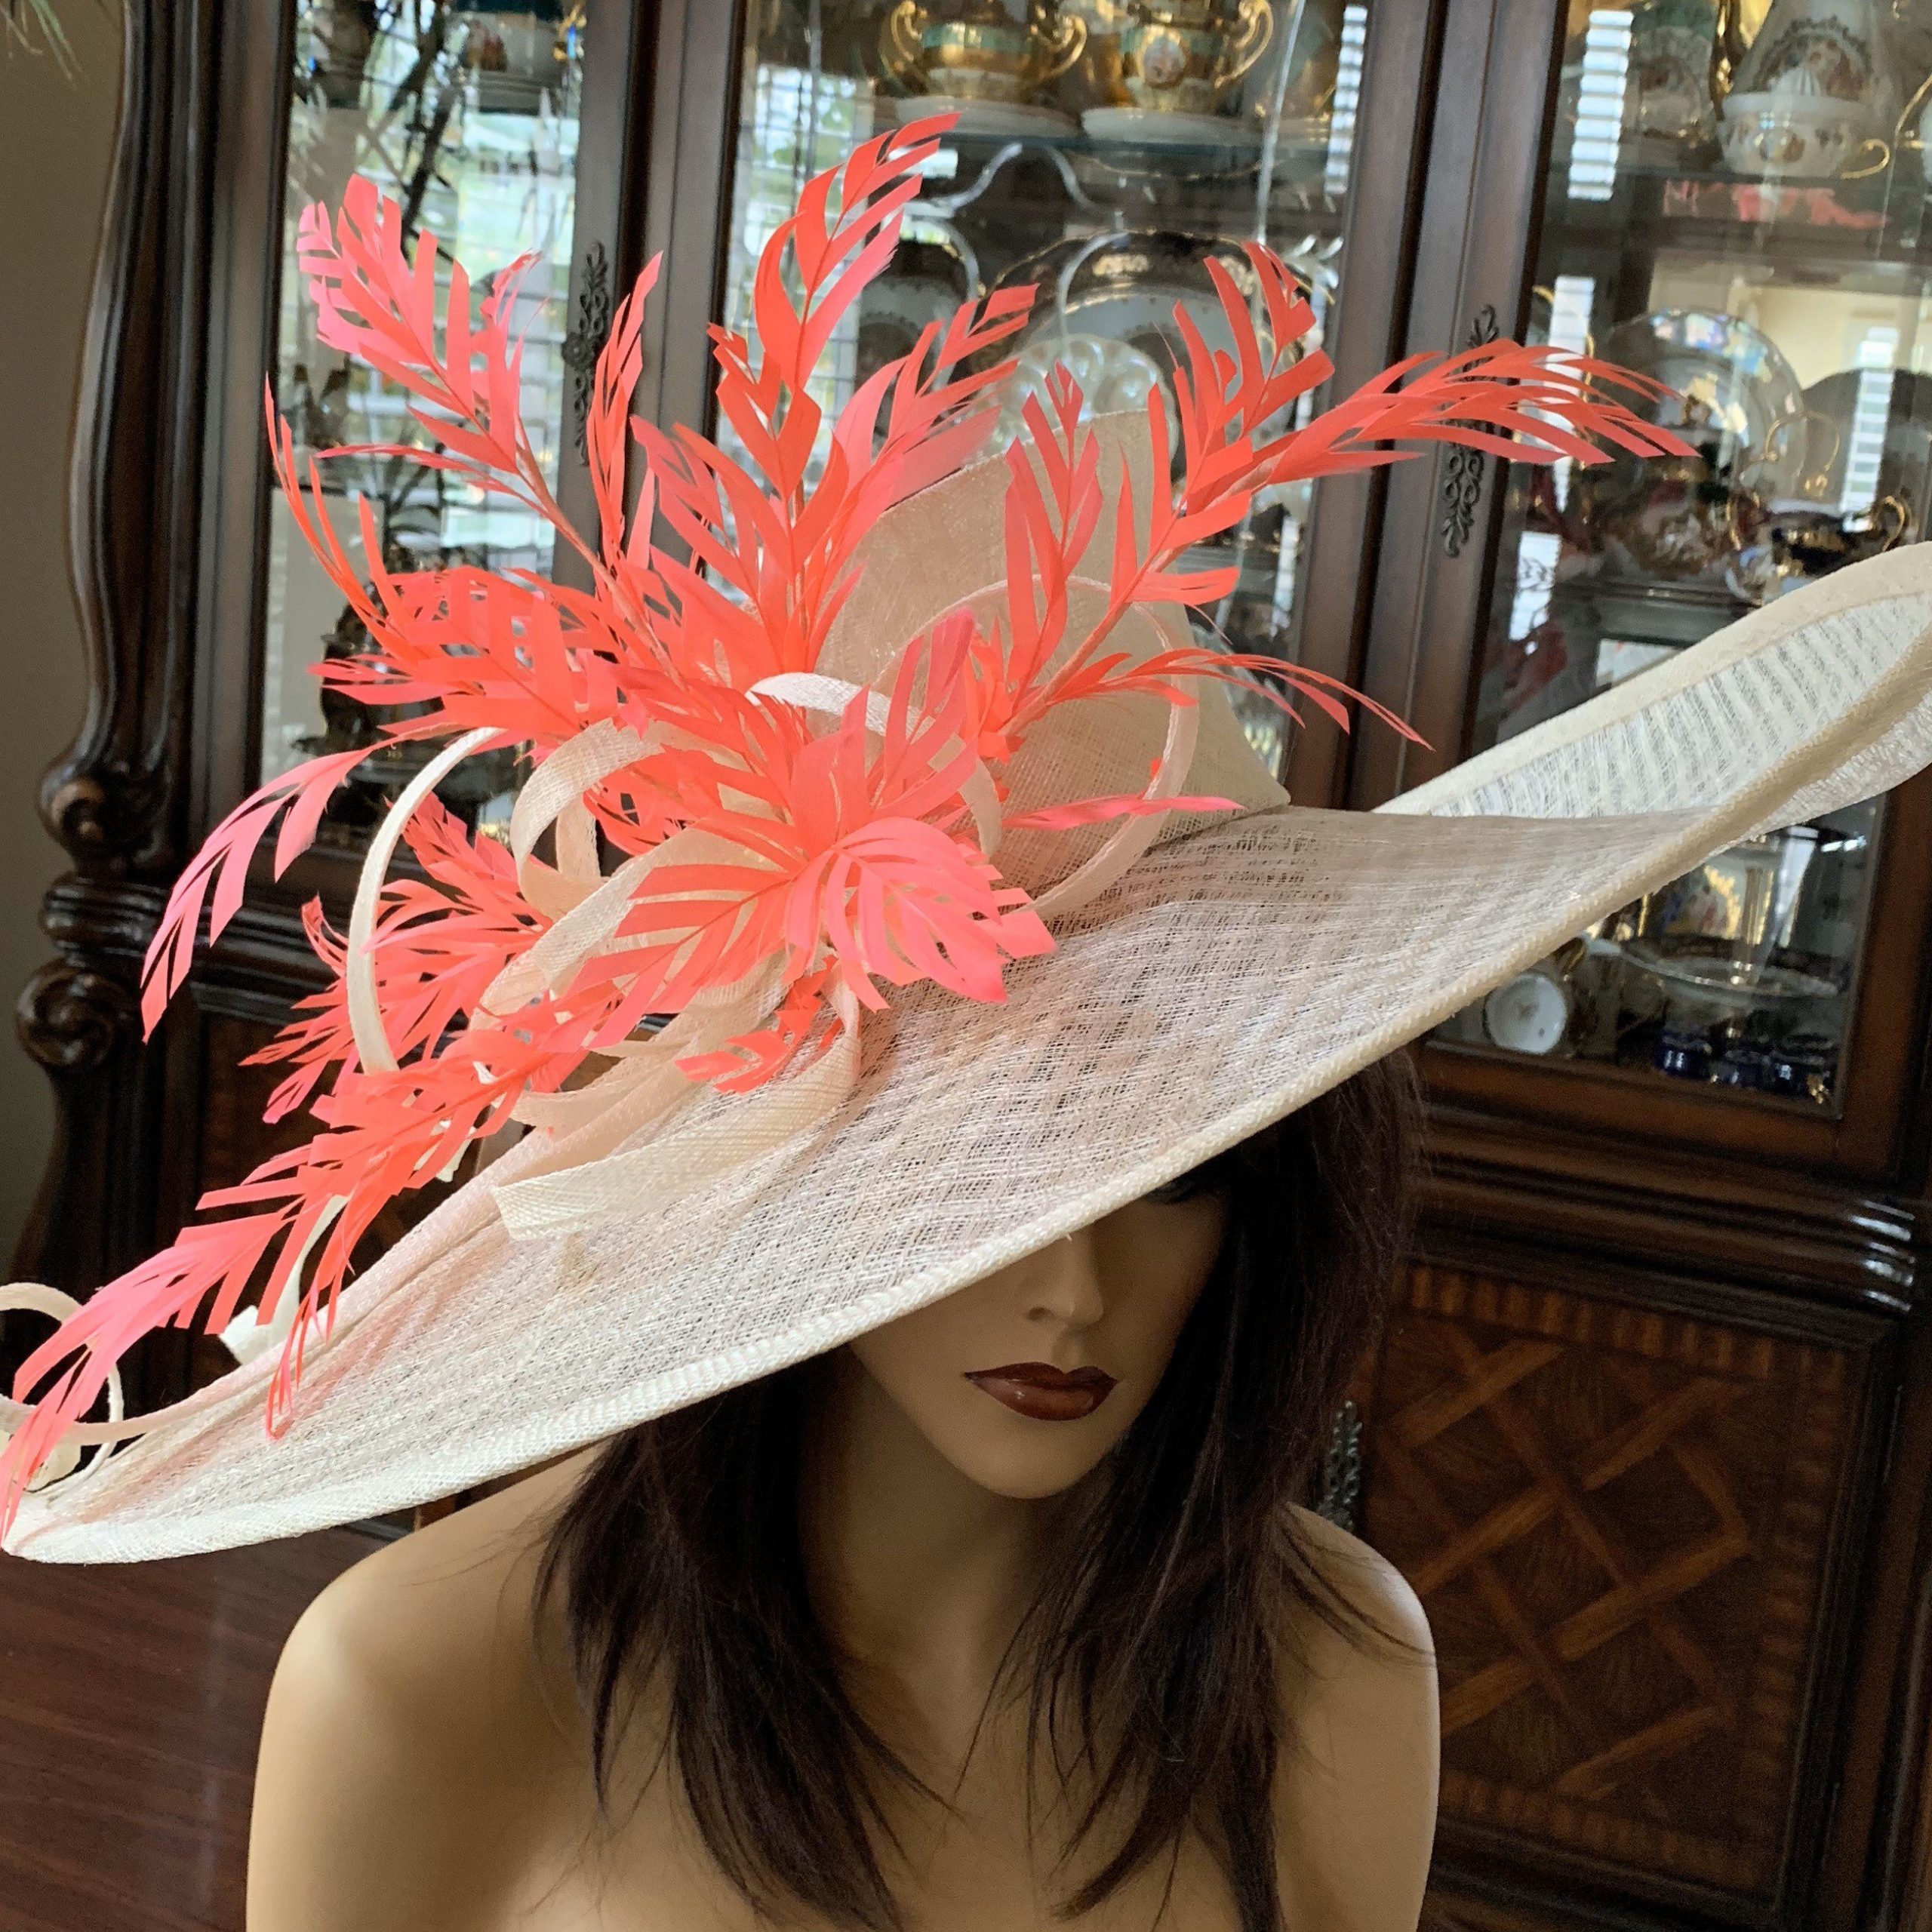 2020. Kentucky Derby hat. Derby hat. Ivory hat. Designer hat. Couture hat. Races. Large pink hat. Royal ascot hat. Preakness. Breeders cup